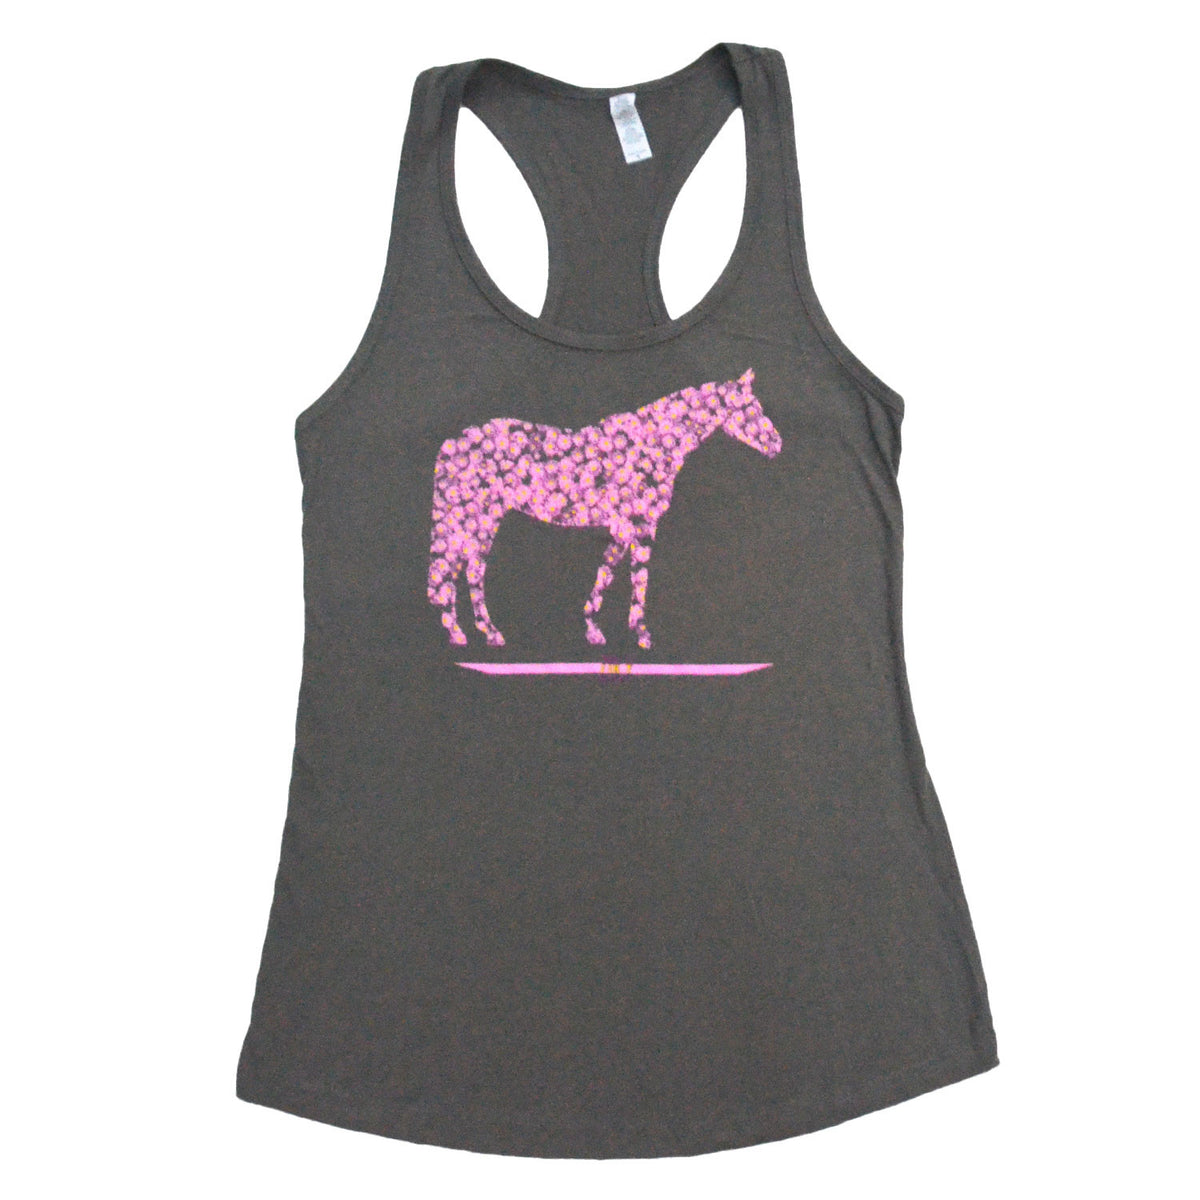 Olive tank top with horse silhouette